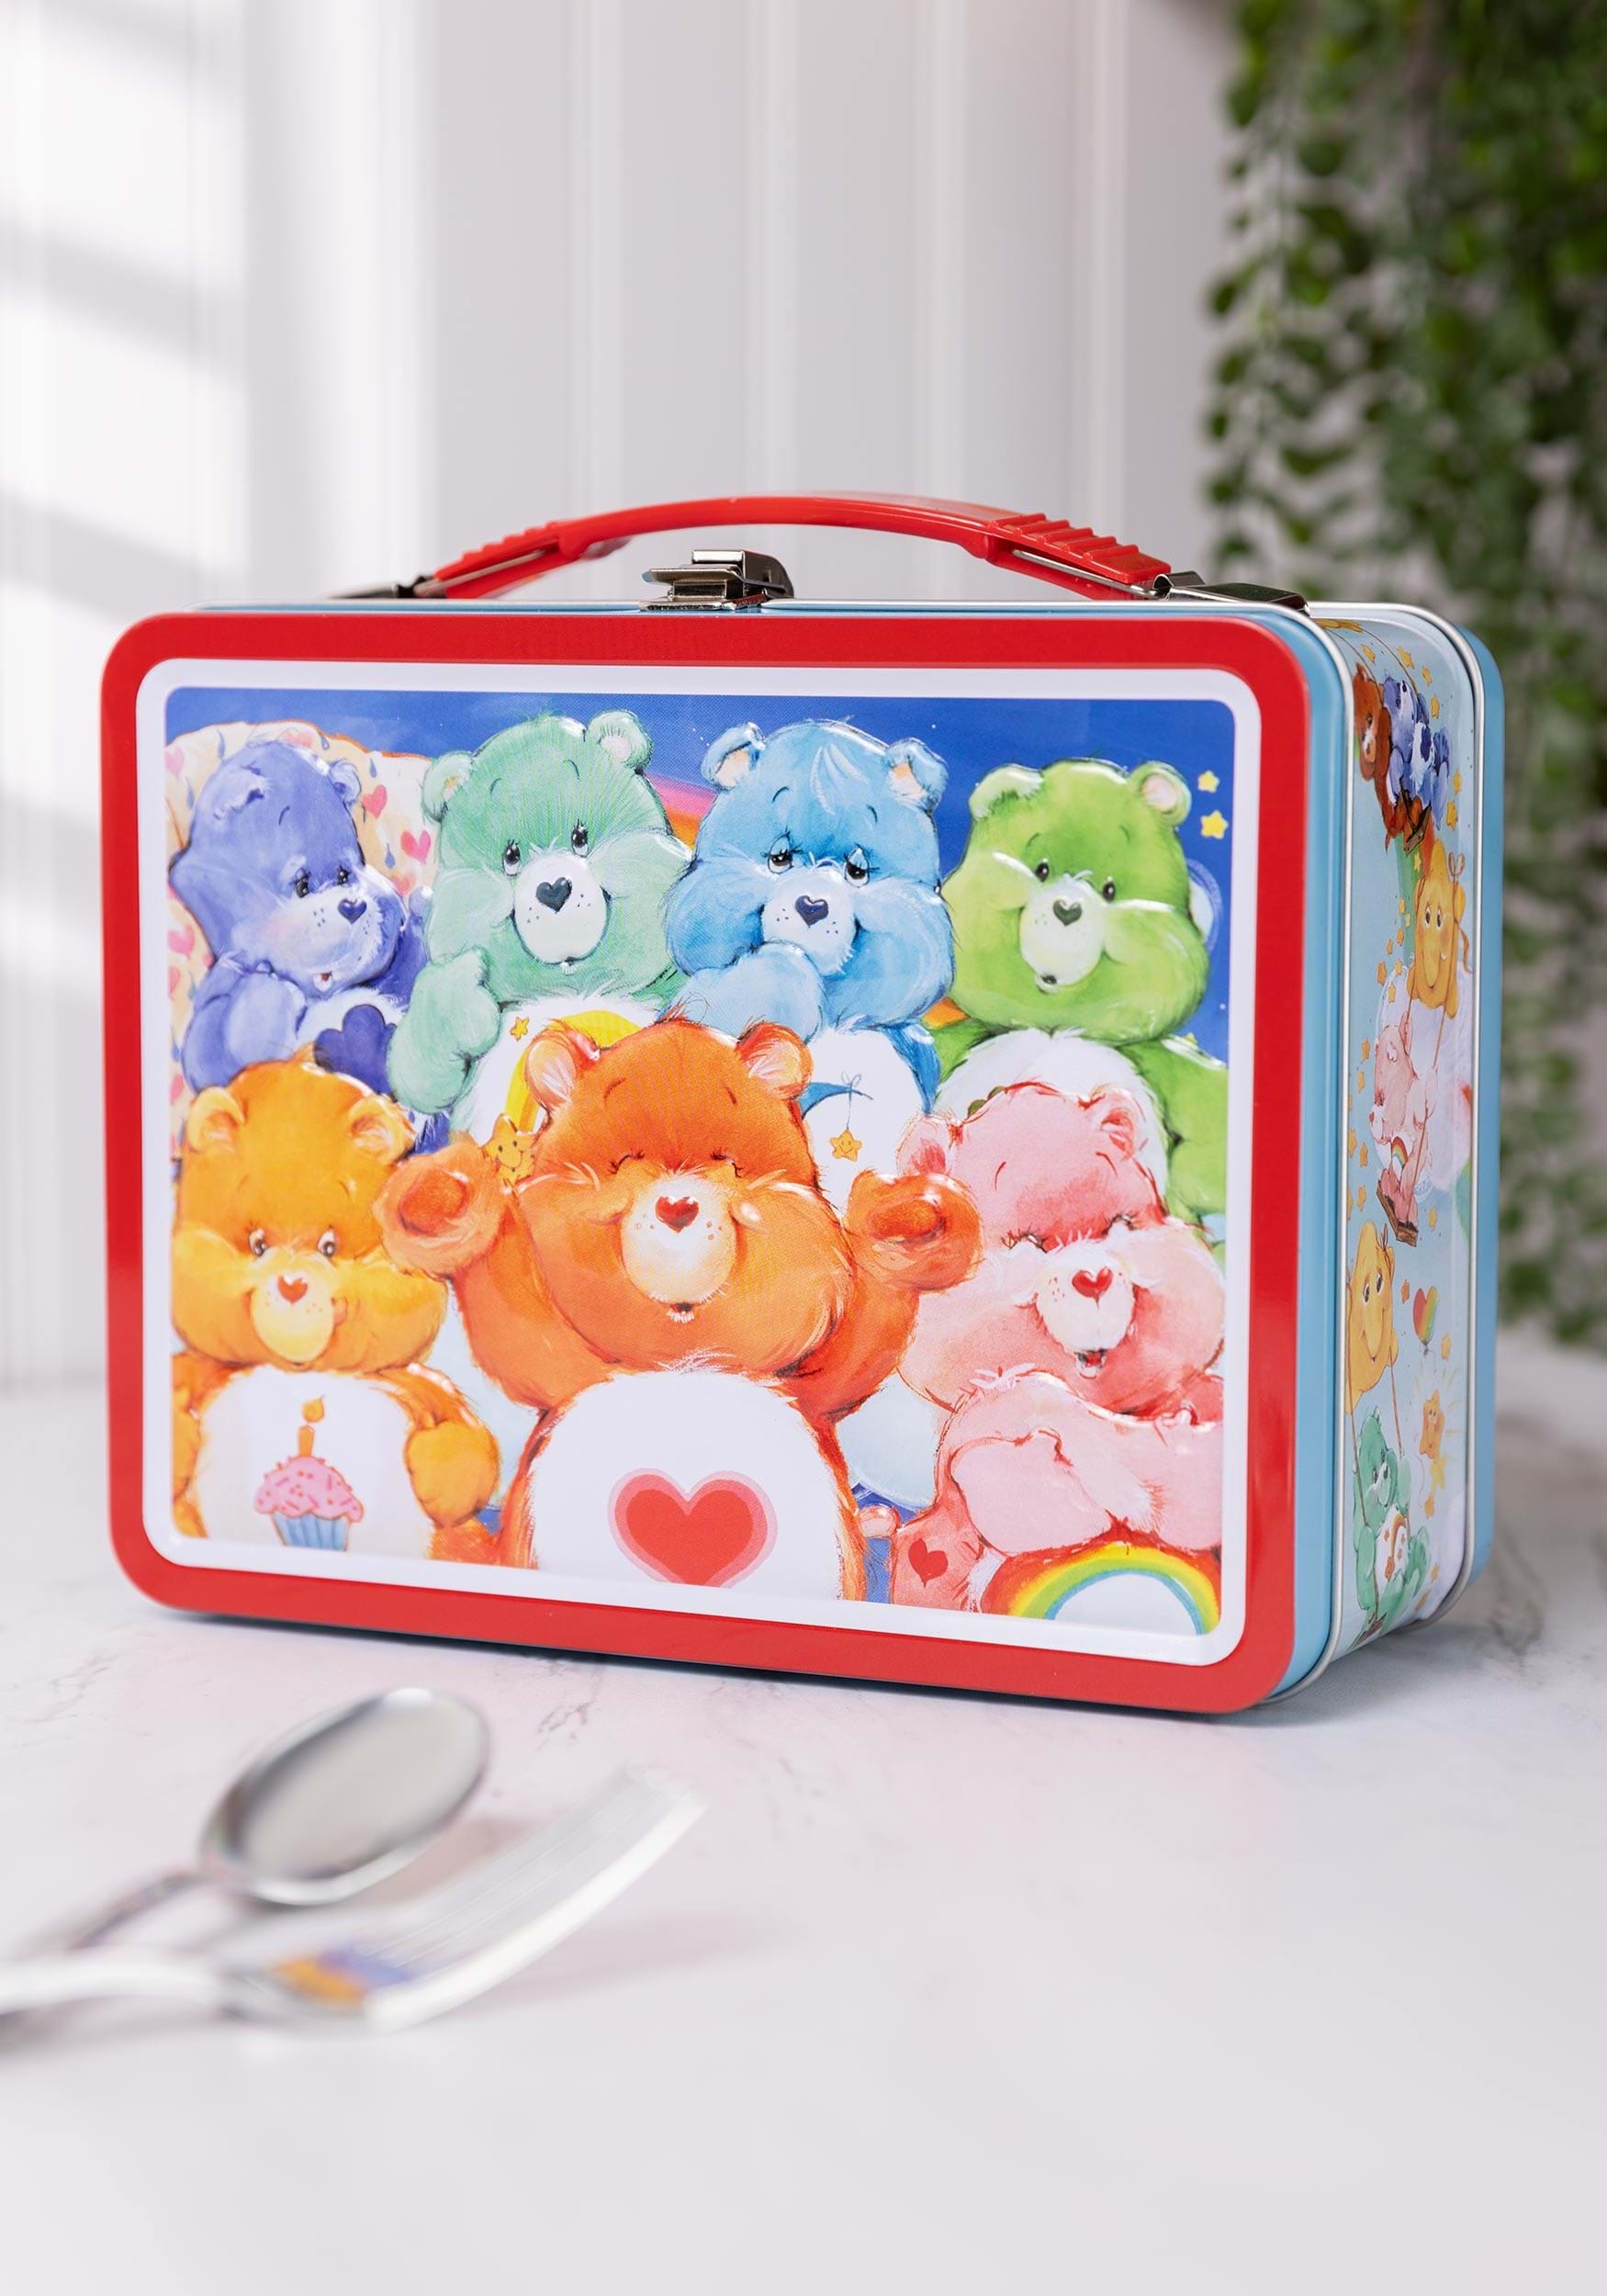 https://images.fun.com/products/83688/1-1/care-bears-metal-lunch-box.jpg